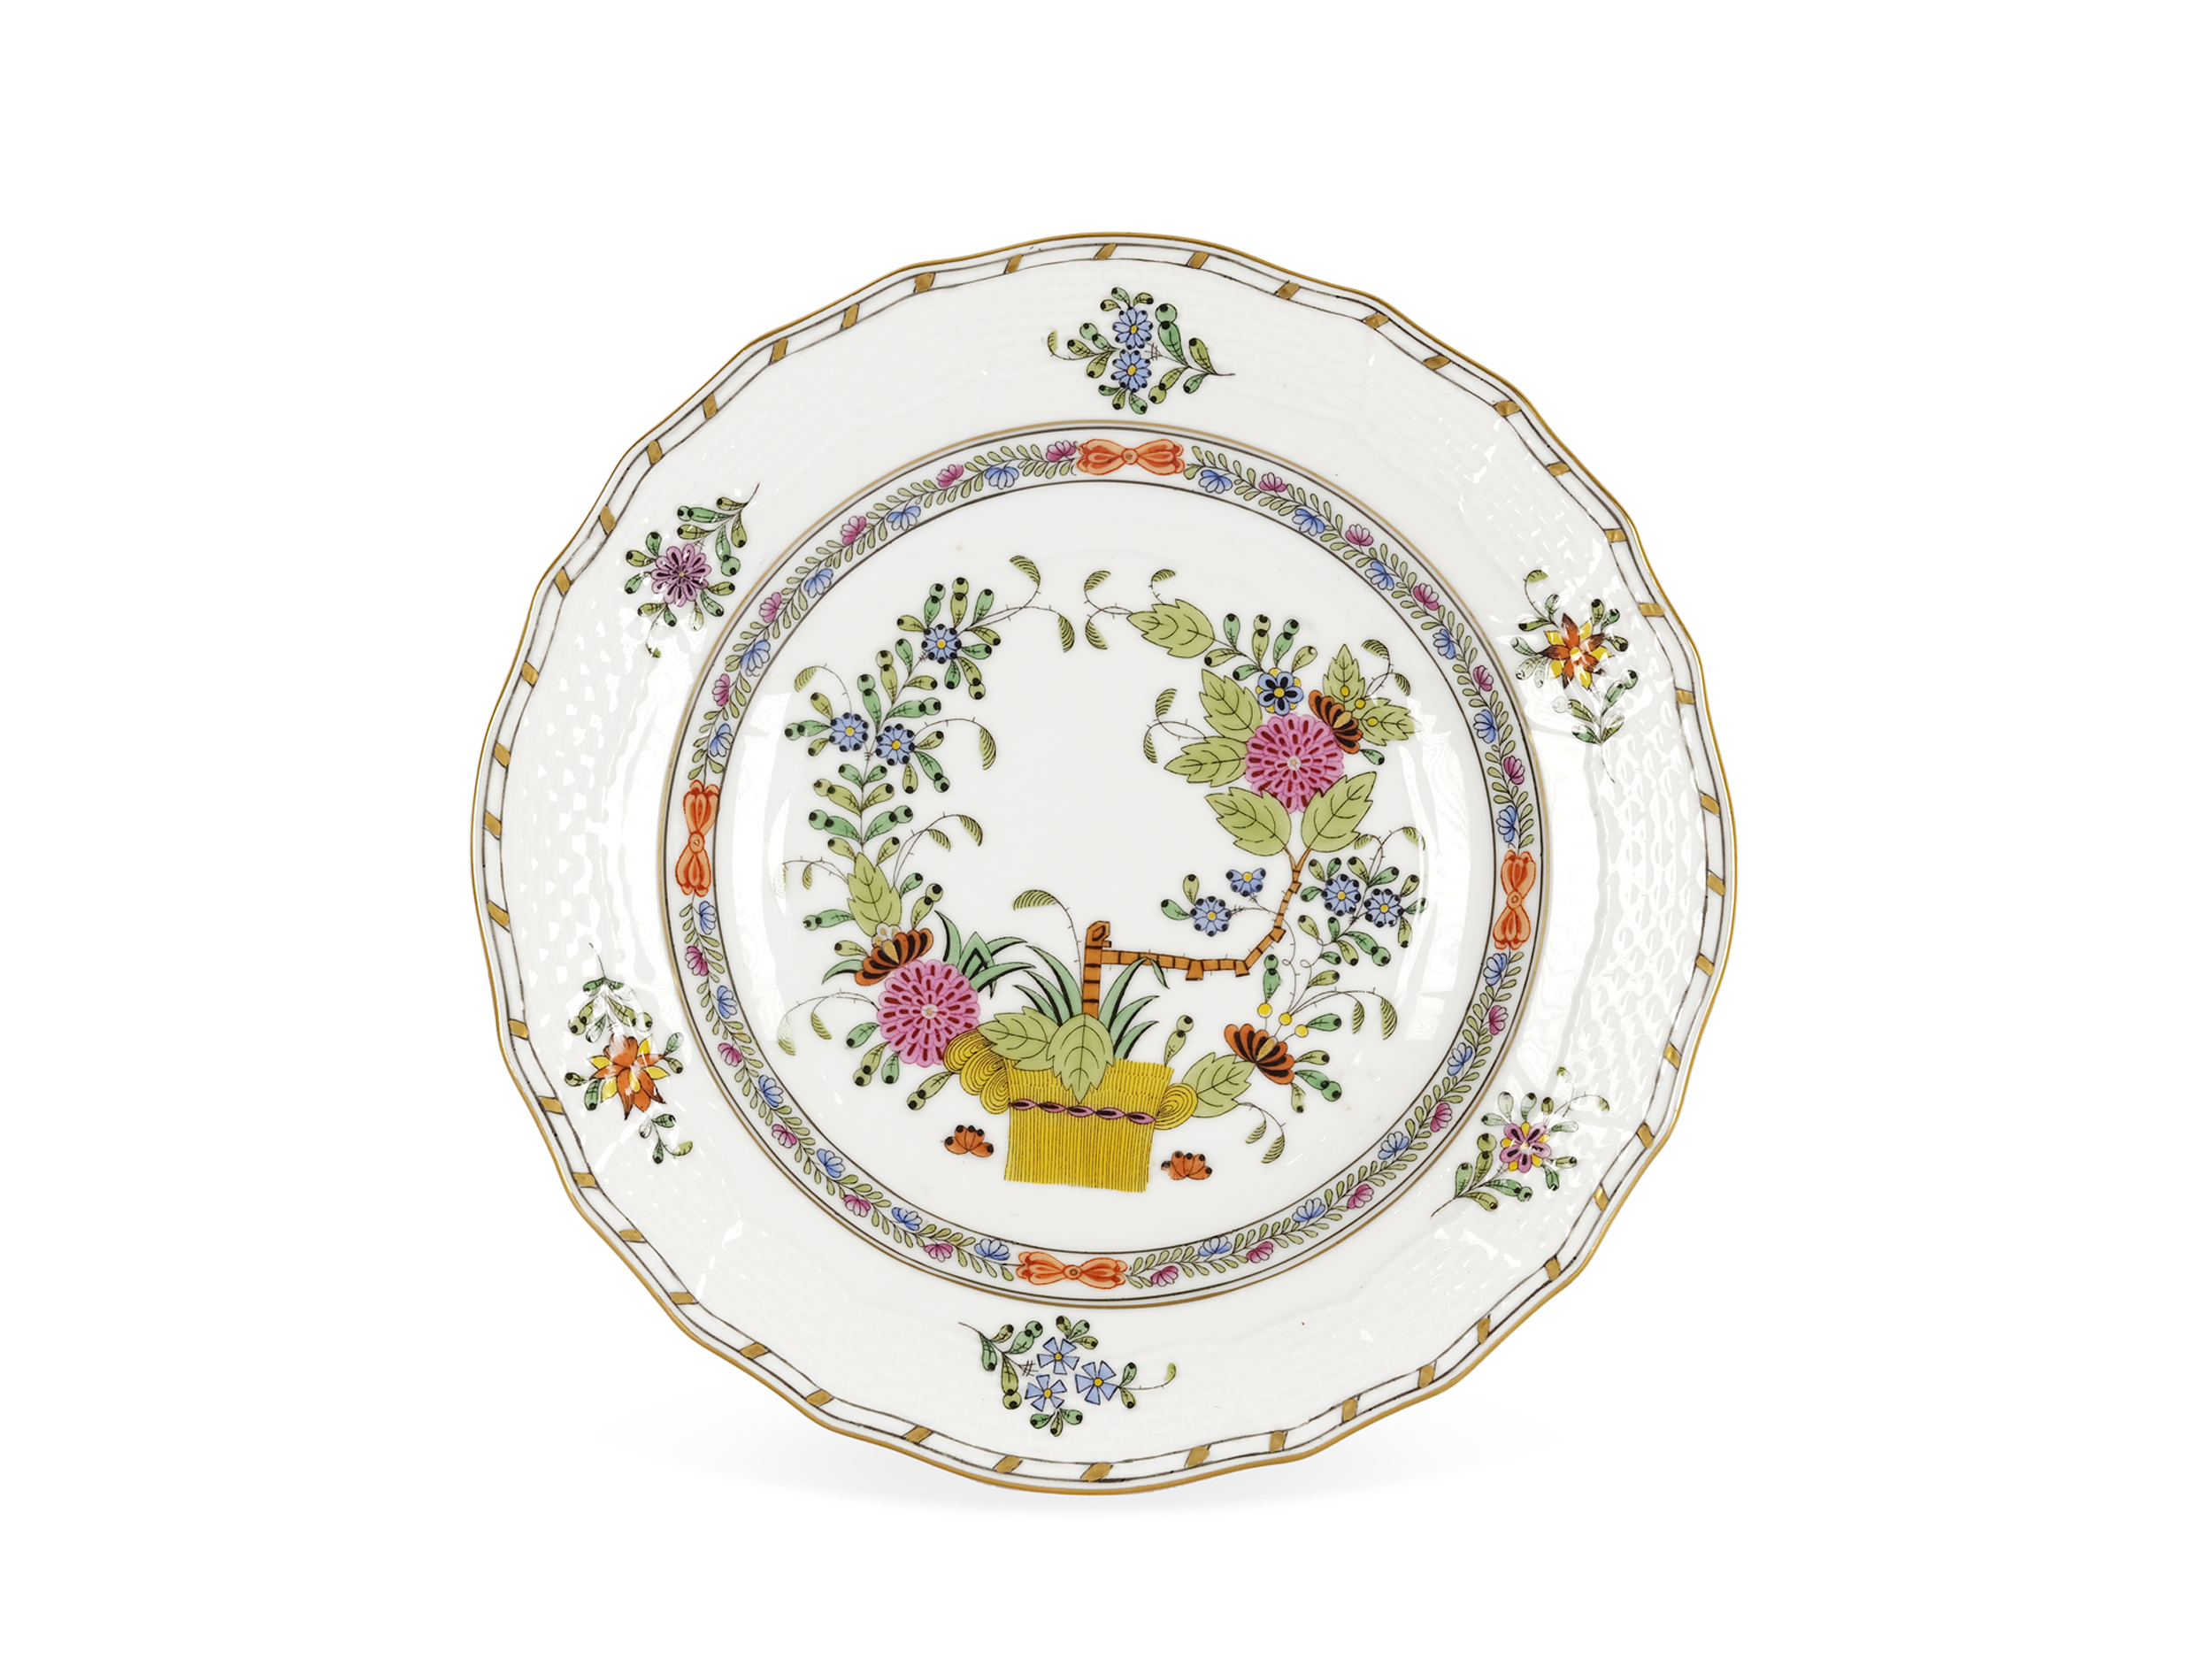 Coffee service for 12 persons, 41-piece, Herend, Fleurs des Indes/Indian Basket Multicolour - Image 4 of 7